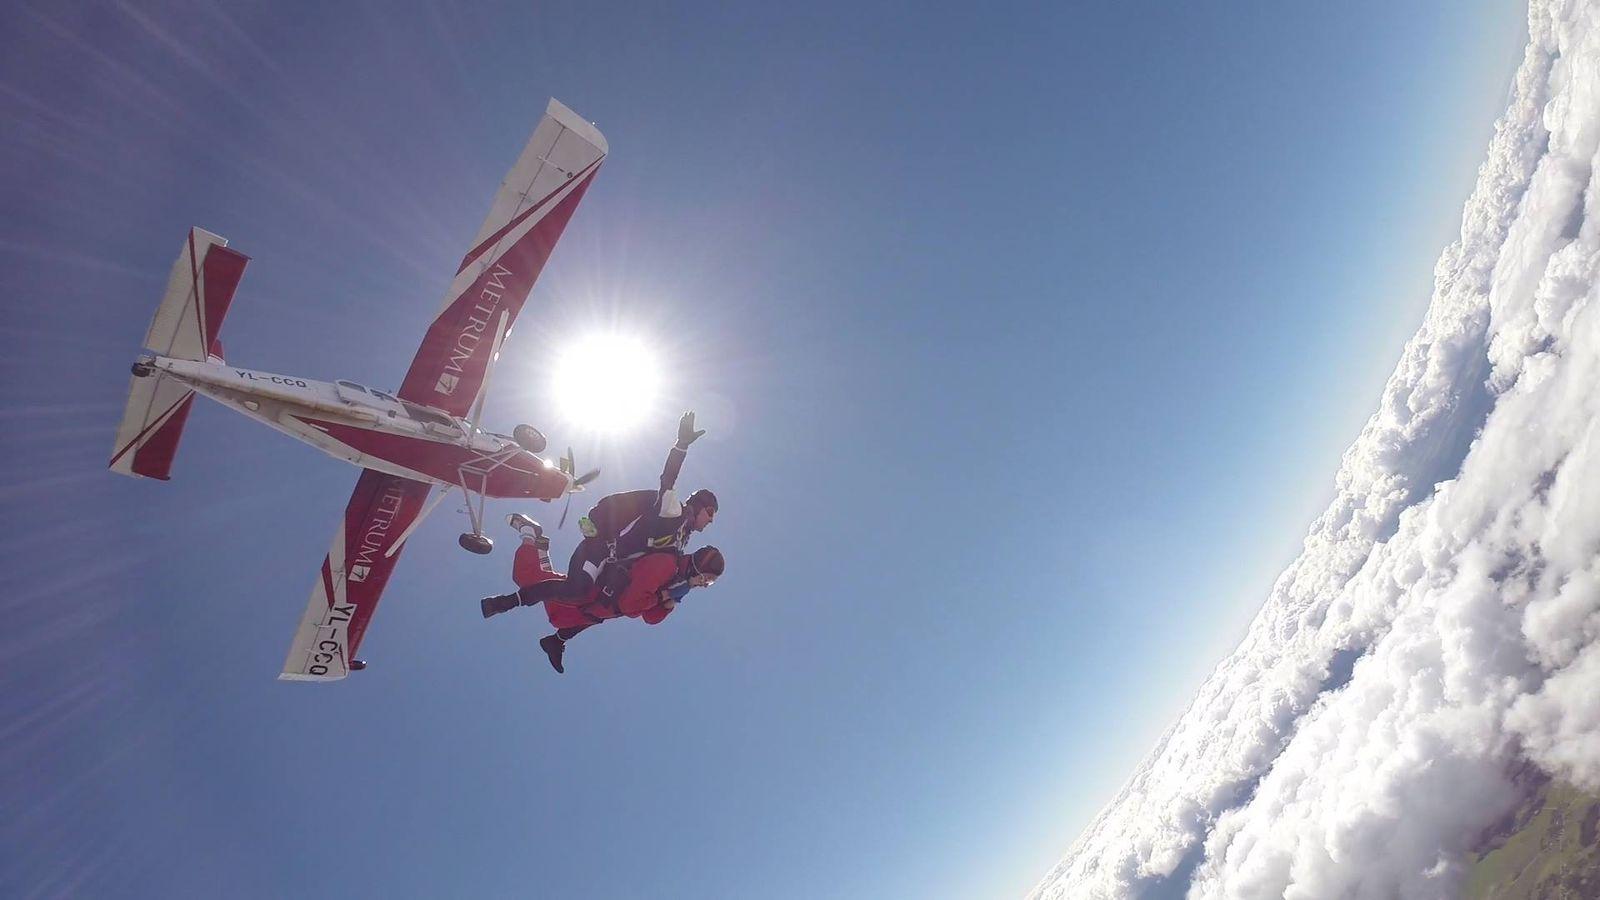 Tandem Skydiving With A Parachute - Skydiving Estonia , HD Wallpaper & Backgrounds